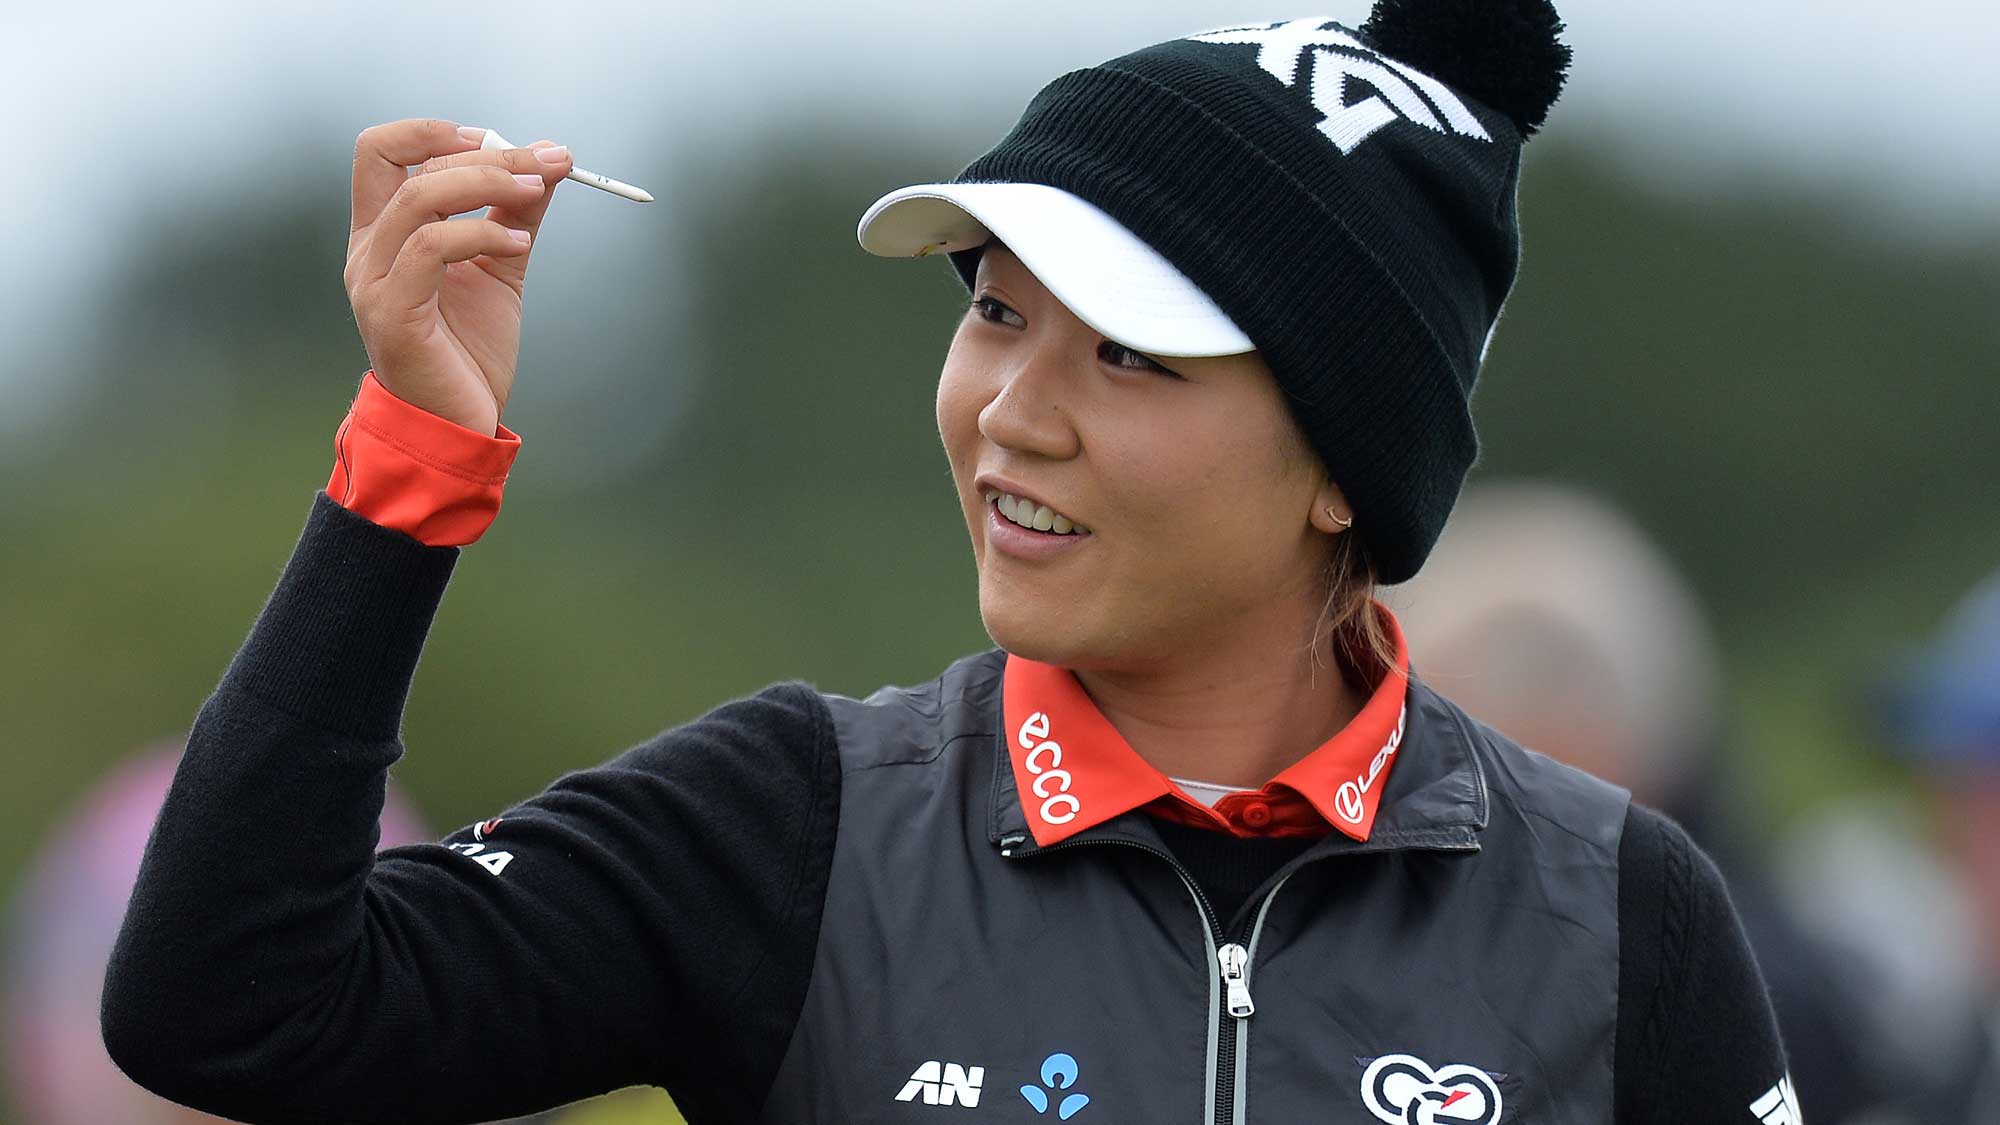 Lydia Ko of New Zealand takes a tee from her hair at the 1st hole during the first day of the Aberdeen Asset Management Ladies Scottish Open at Dundonald Links Golf Course